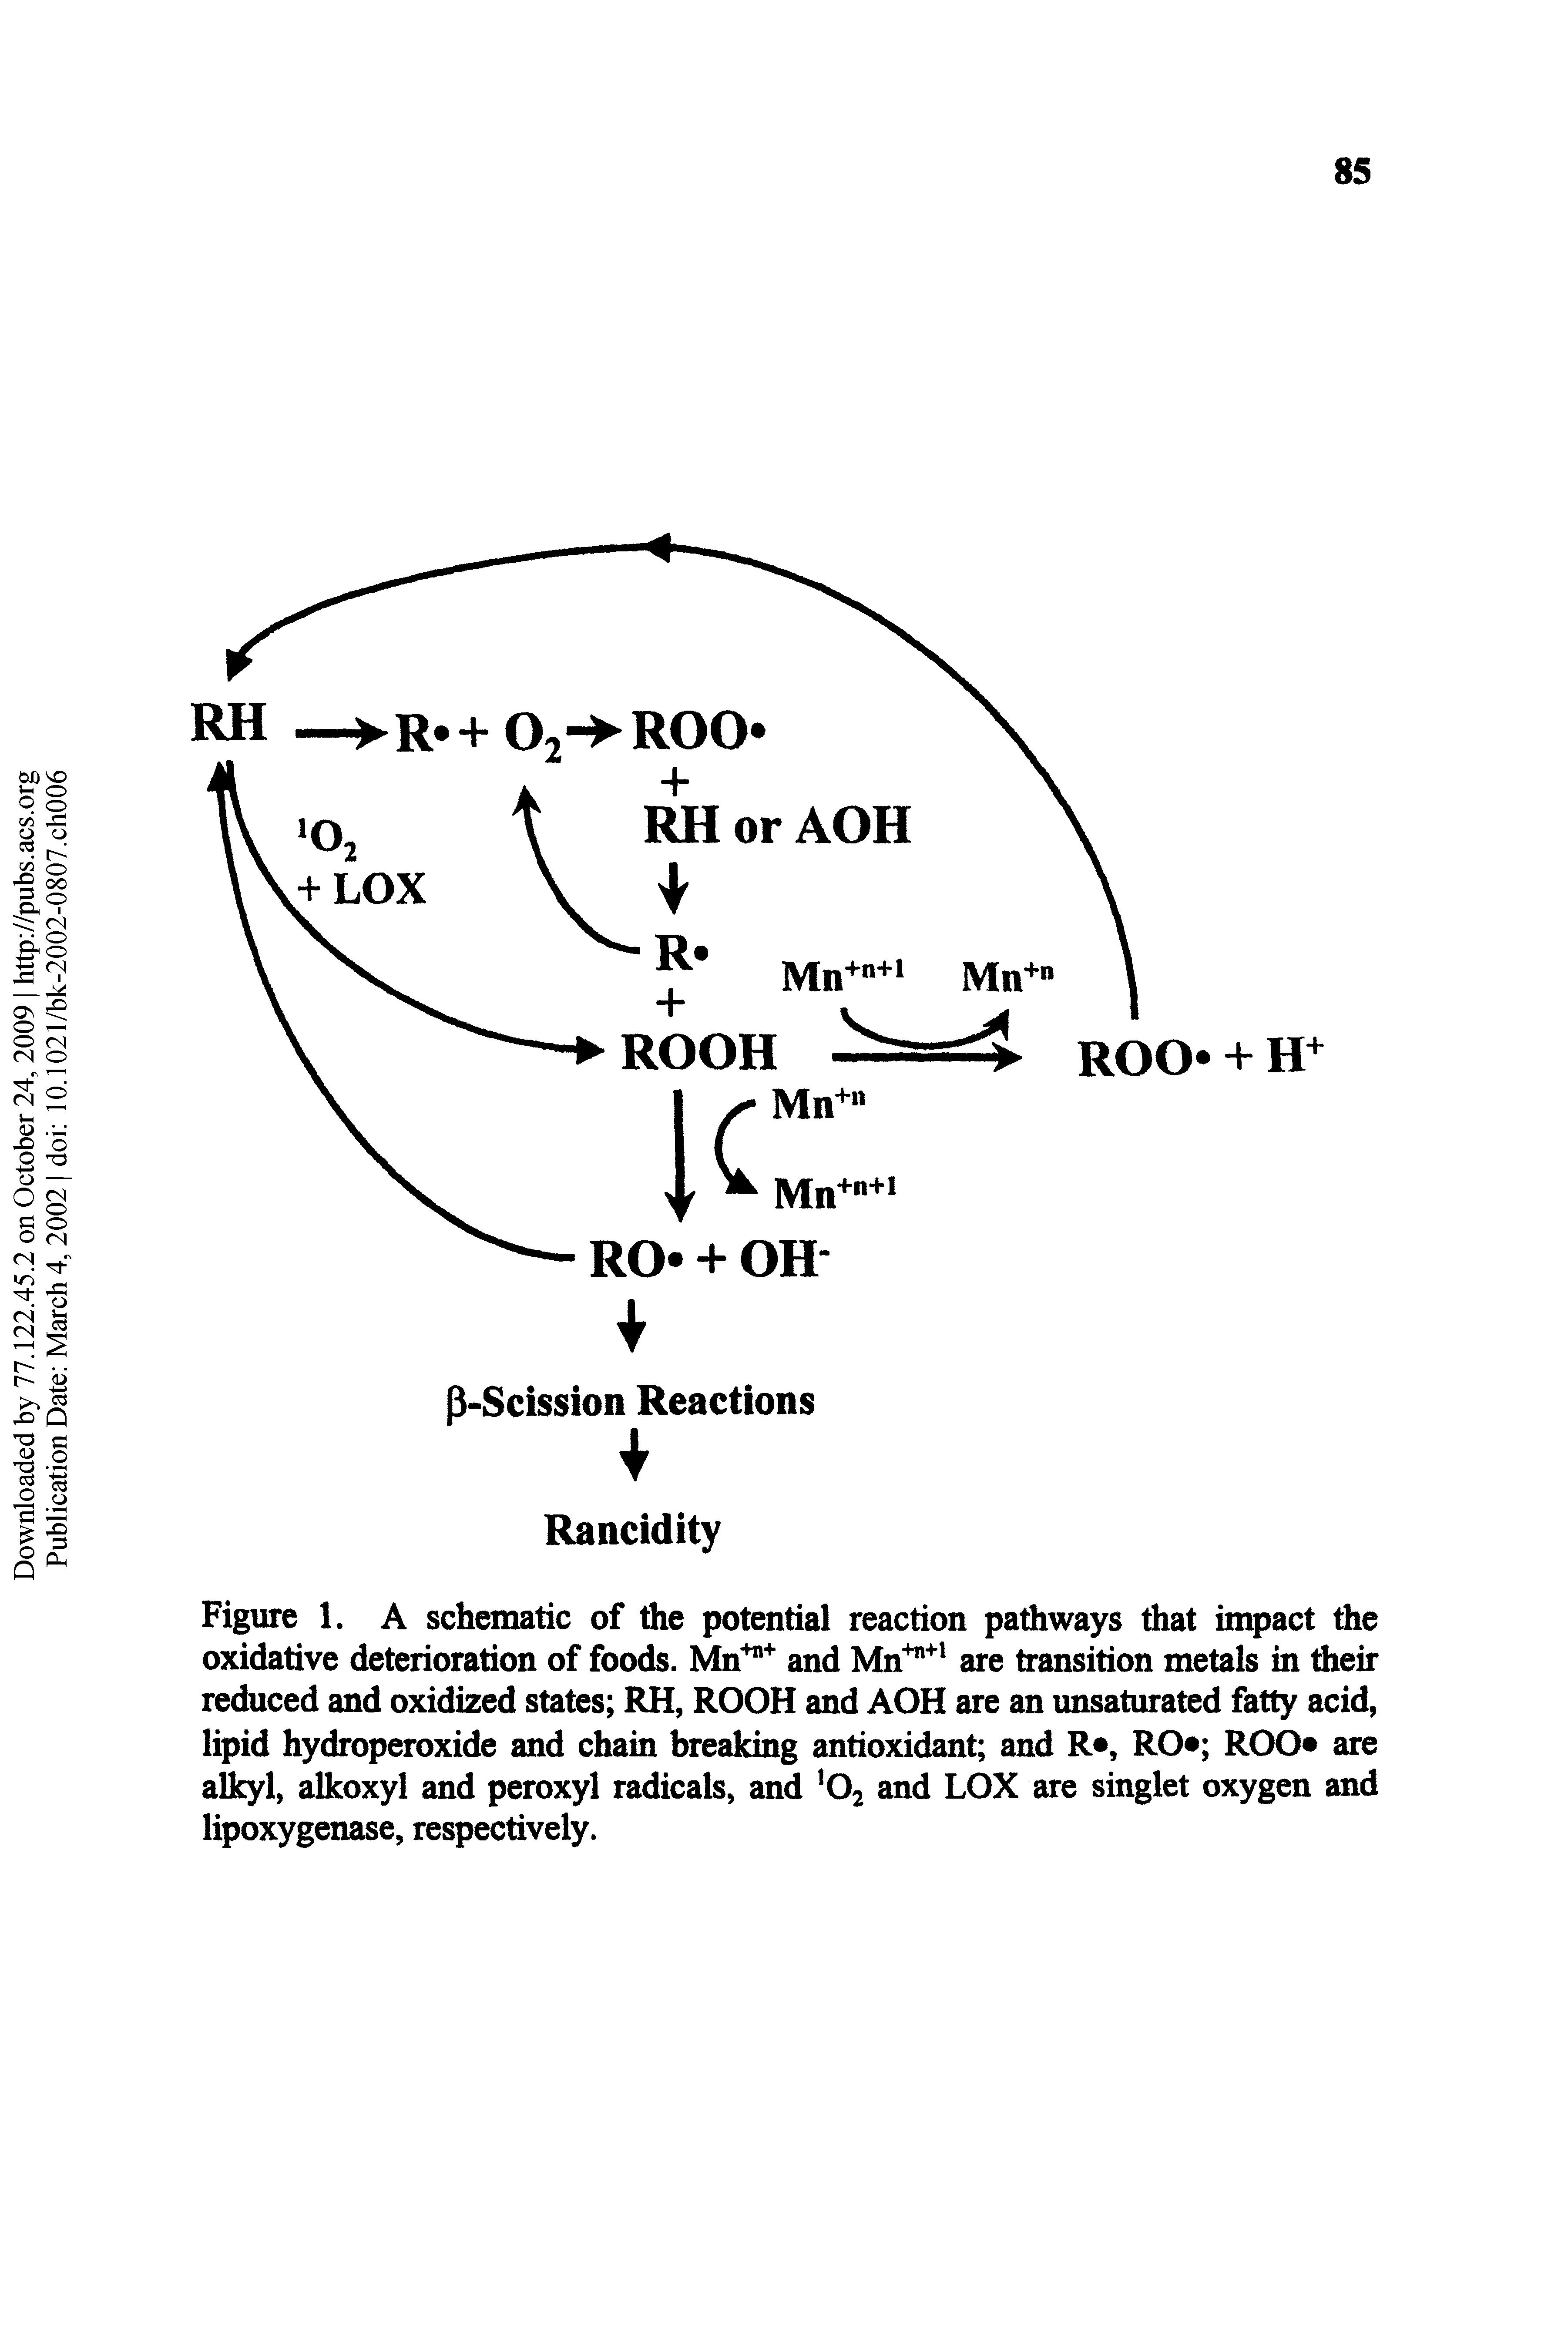 Figure 1. A schematic of die potential reaction pathways that intact the oxidative deterioration of foods. Mn and Mn " are transition metals in their reduced and oxidized states RH, ROOH and AOH are an unsaturated fatty acid, lipid hydroperoxide and chain breaking antioxidant and R , RO ROO are alkyl, alkoxyl and peroxyl radicals, and Oj and LOX are singlet oxygen and lipoxygenase, respectively.